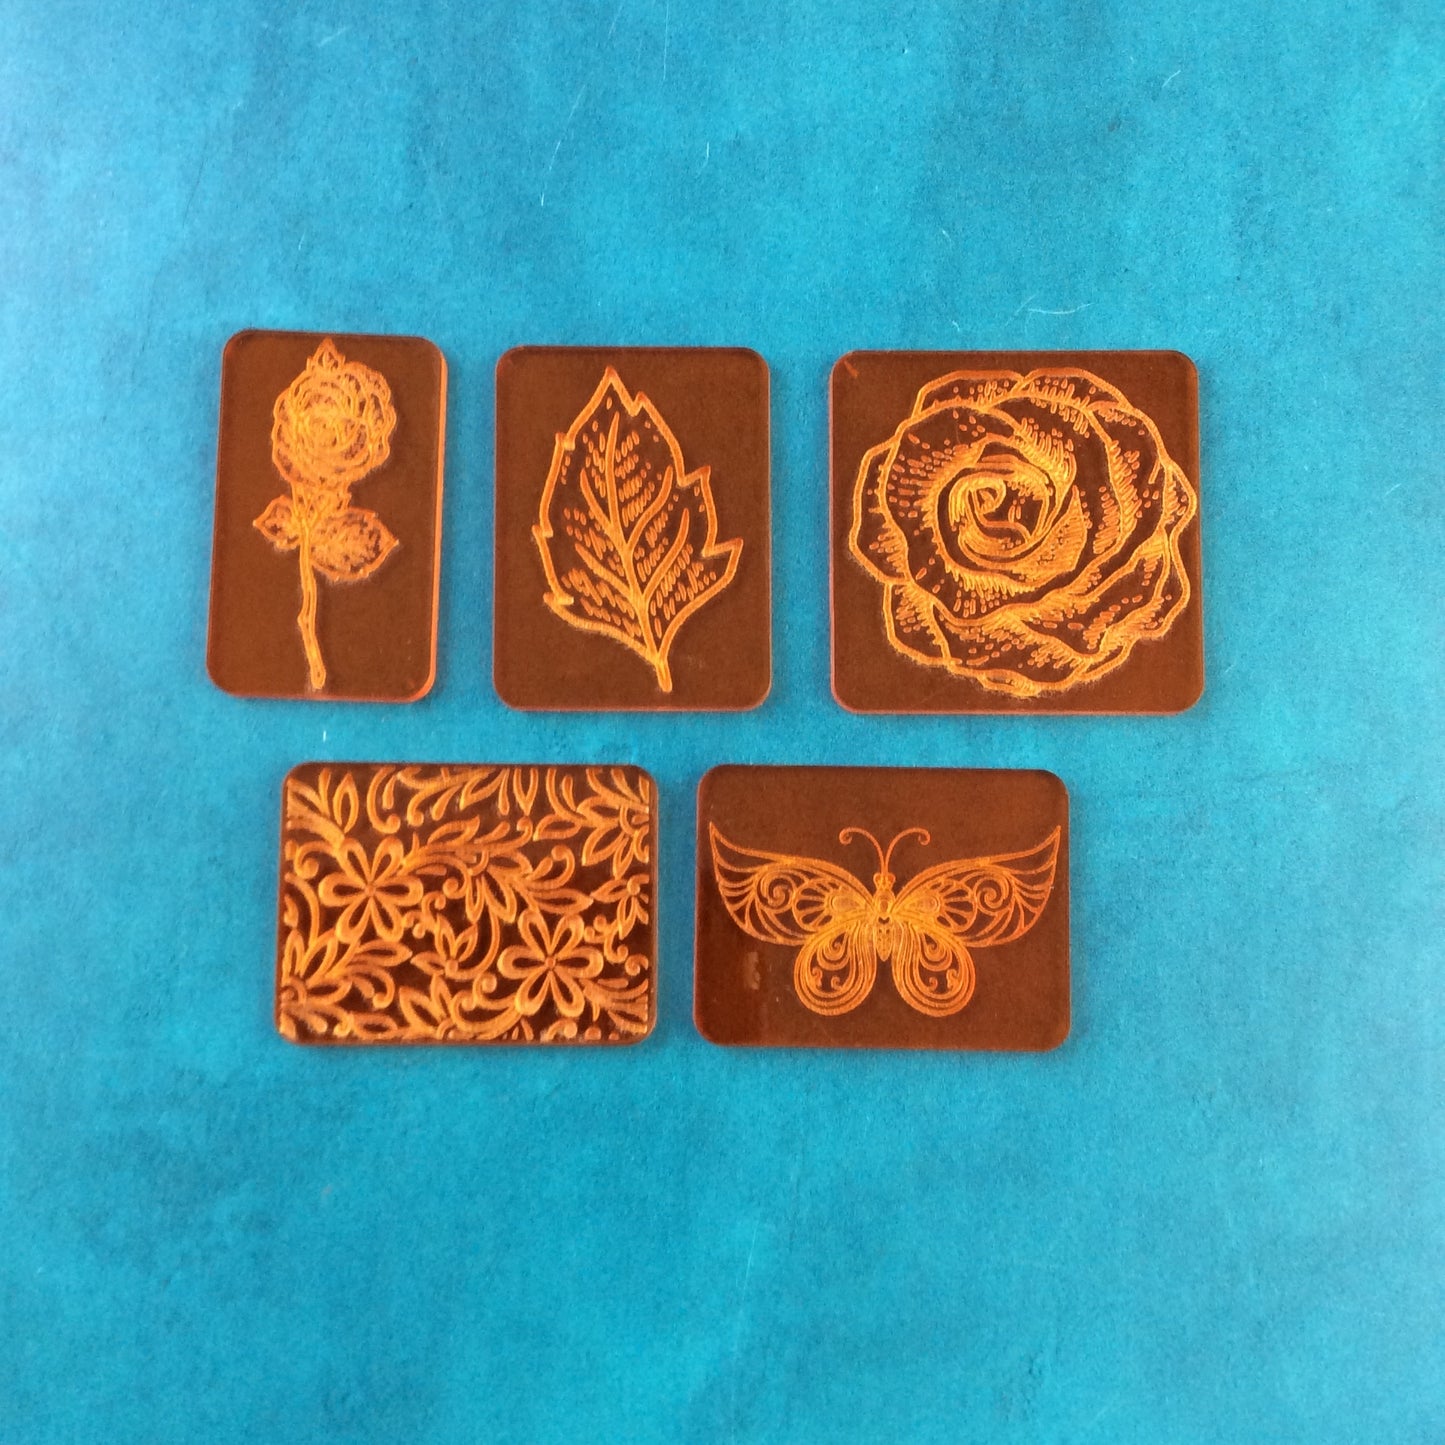 Garden Dreams Deco Disc Stamp and Texture Pattern Designs for polymer clay